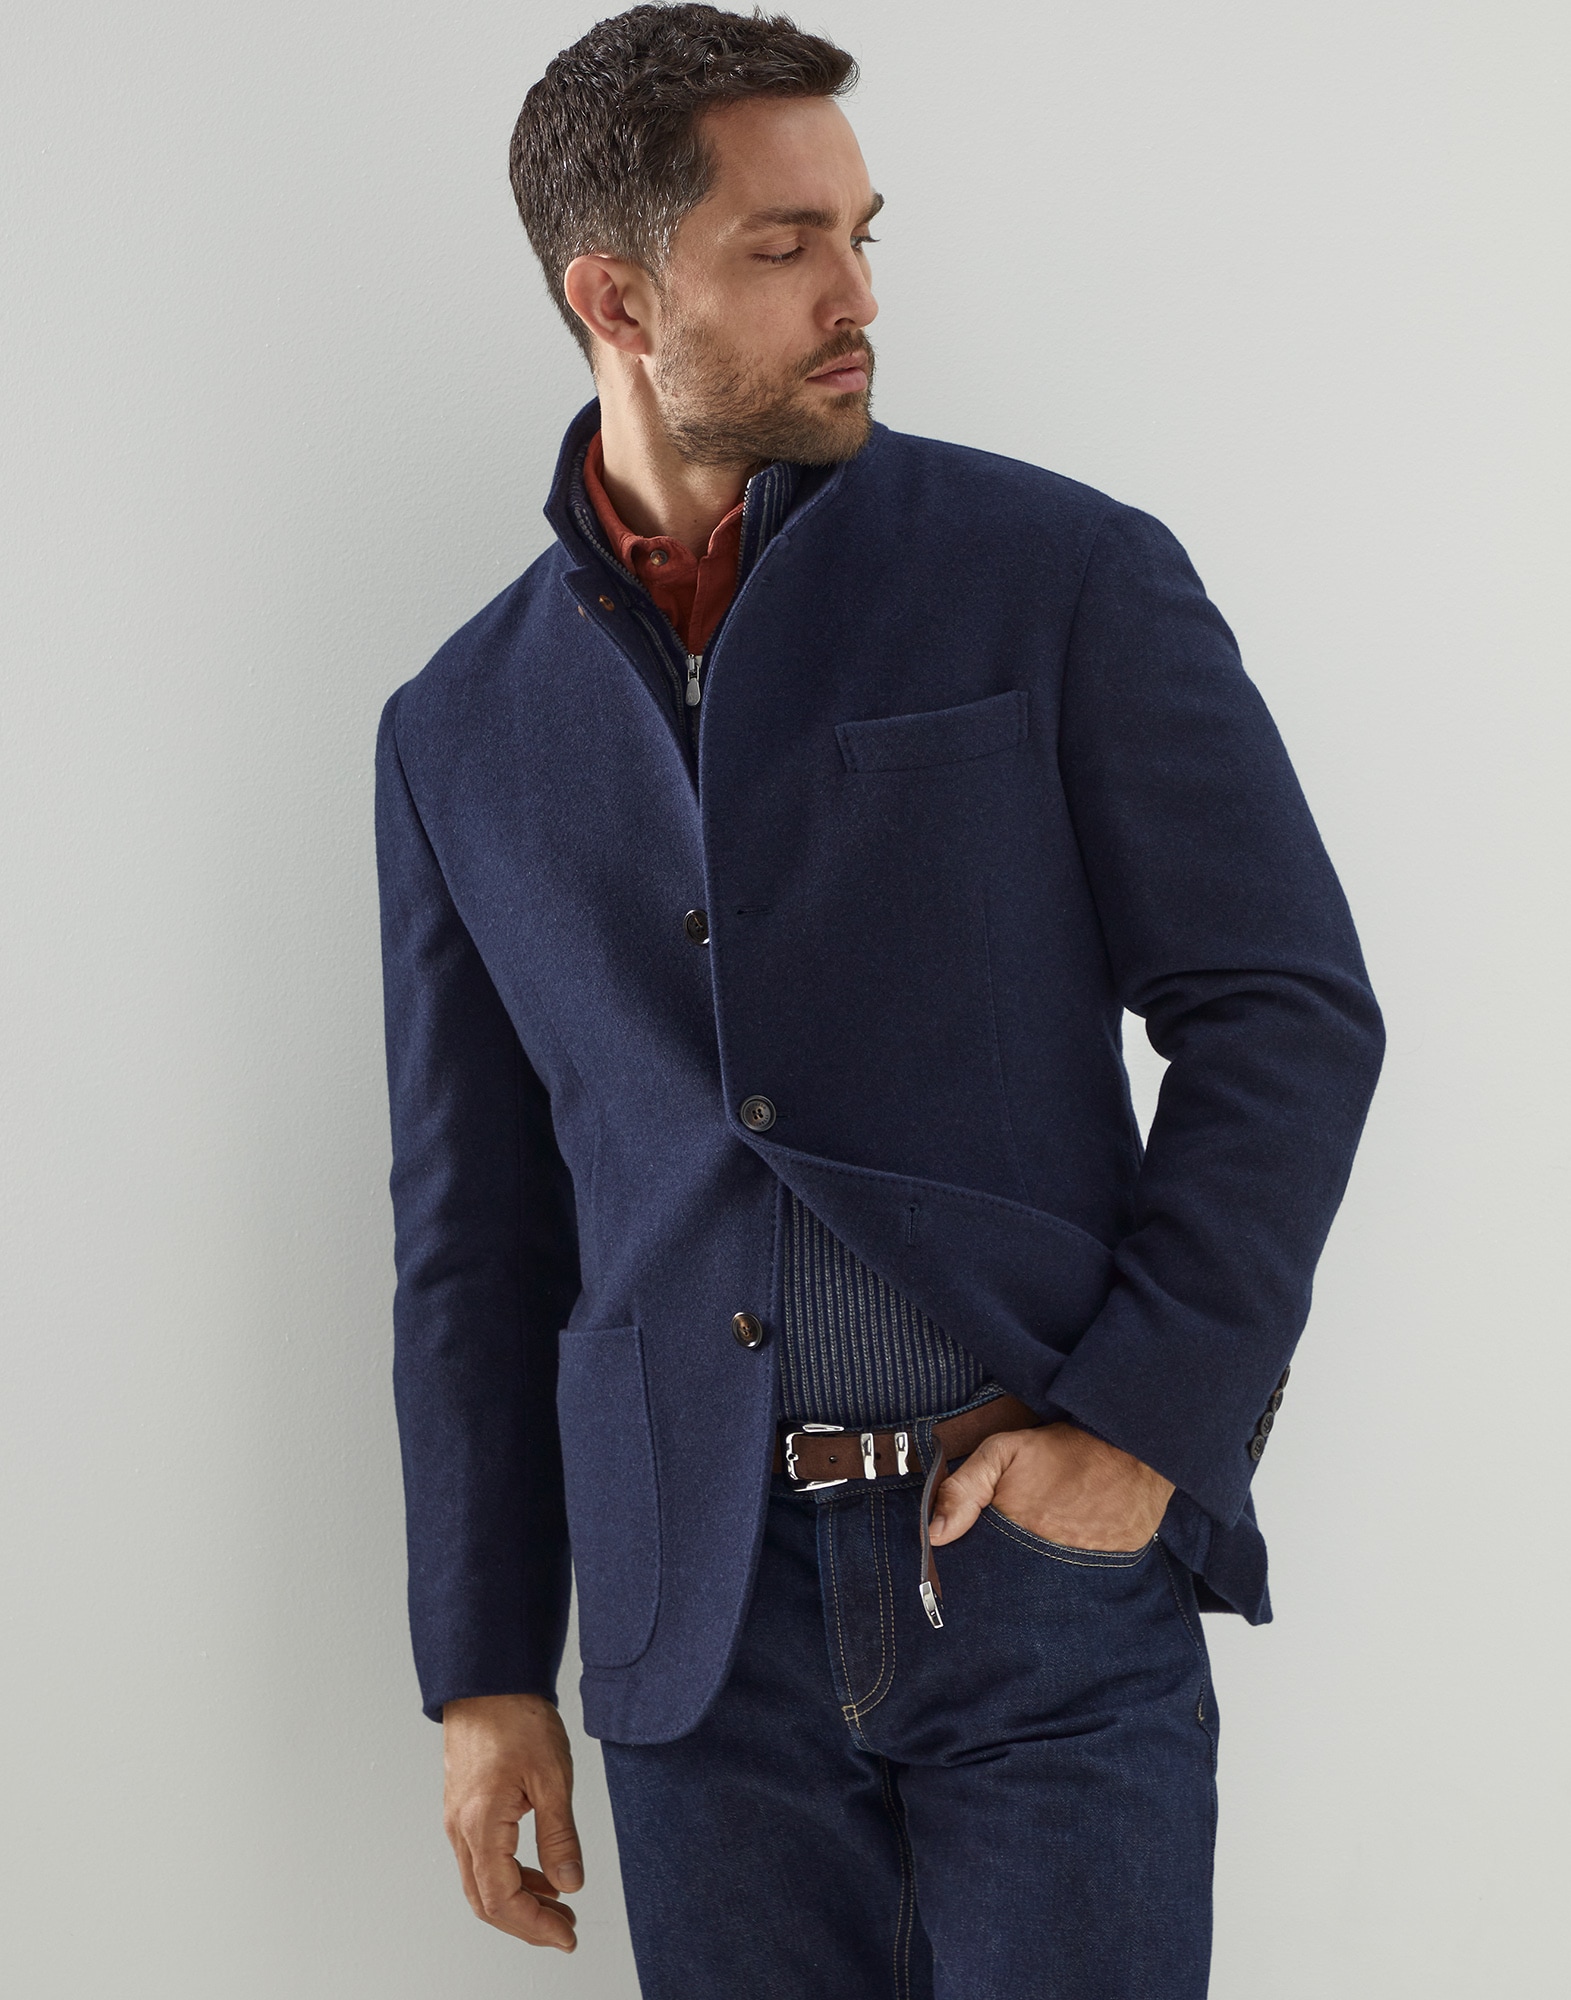 Jacket-style outerwear